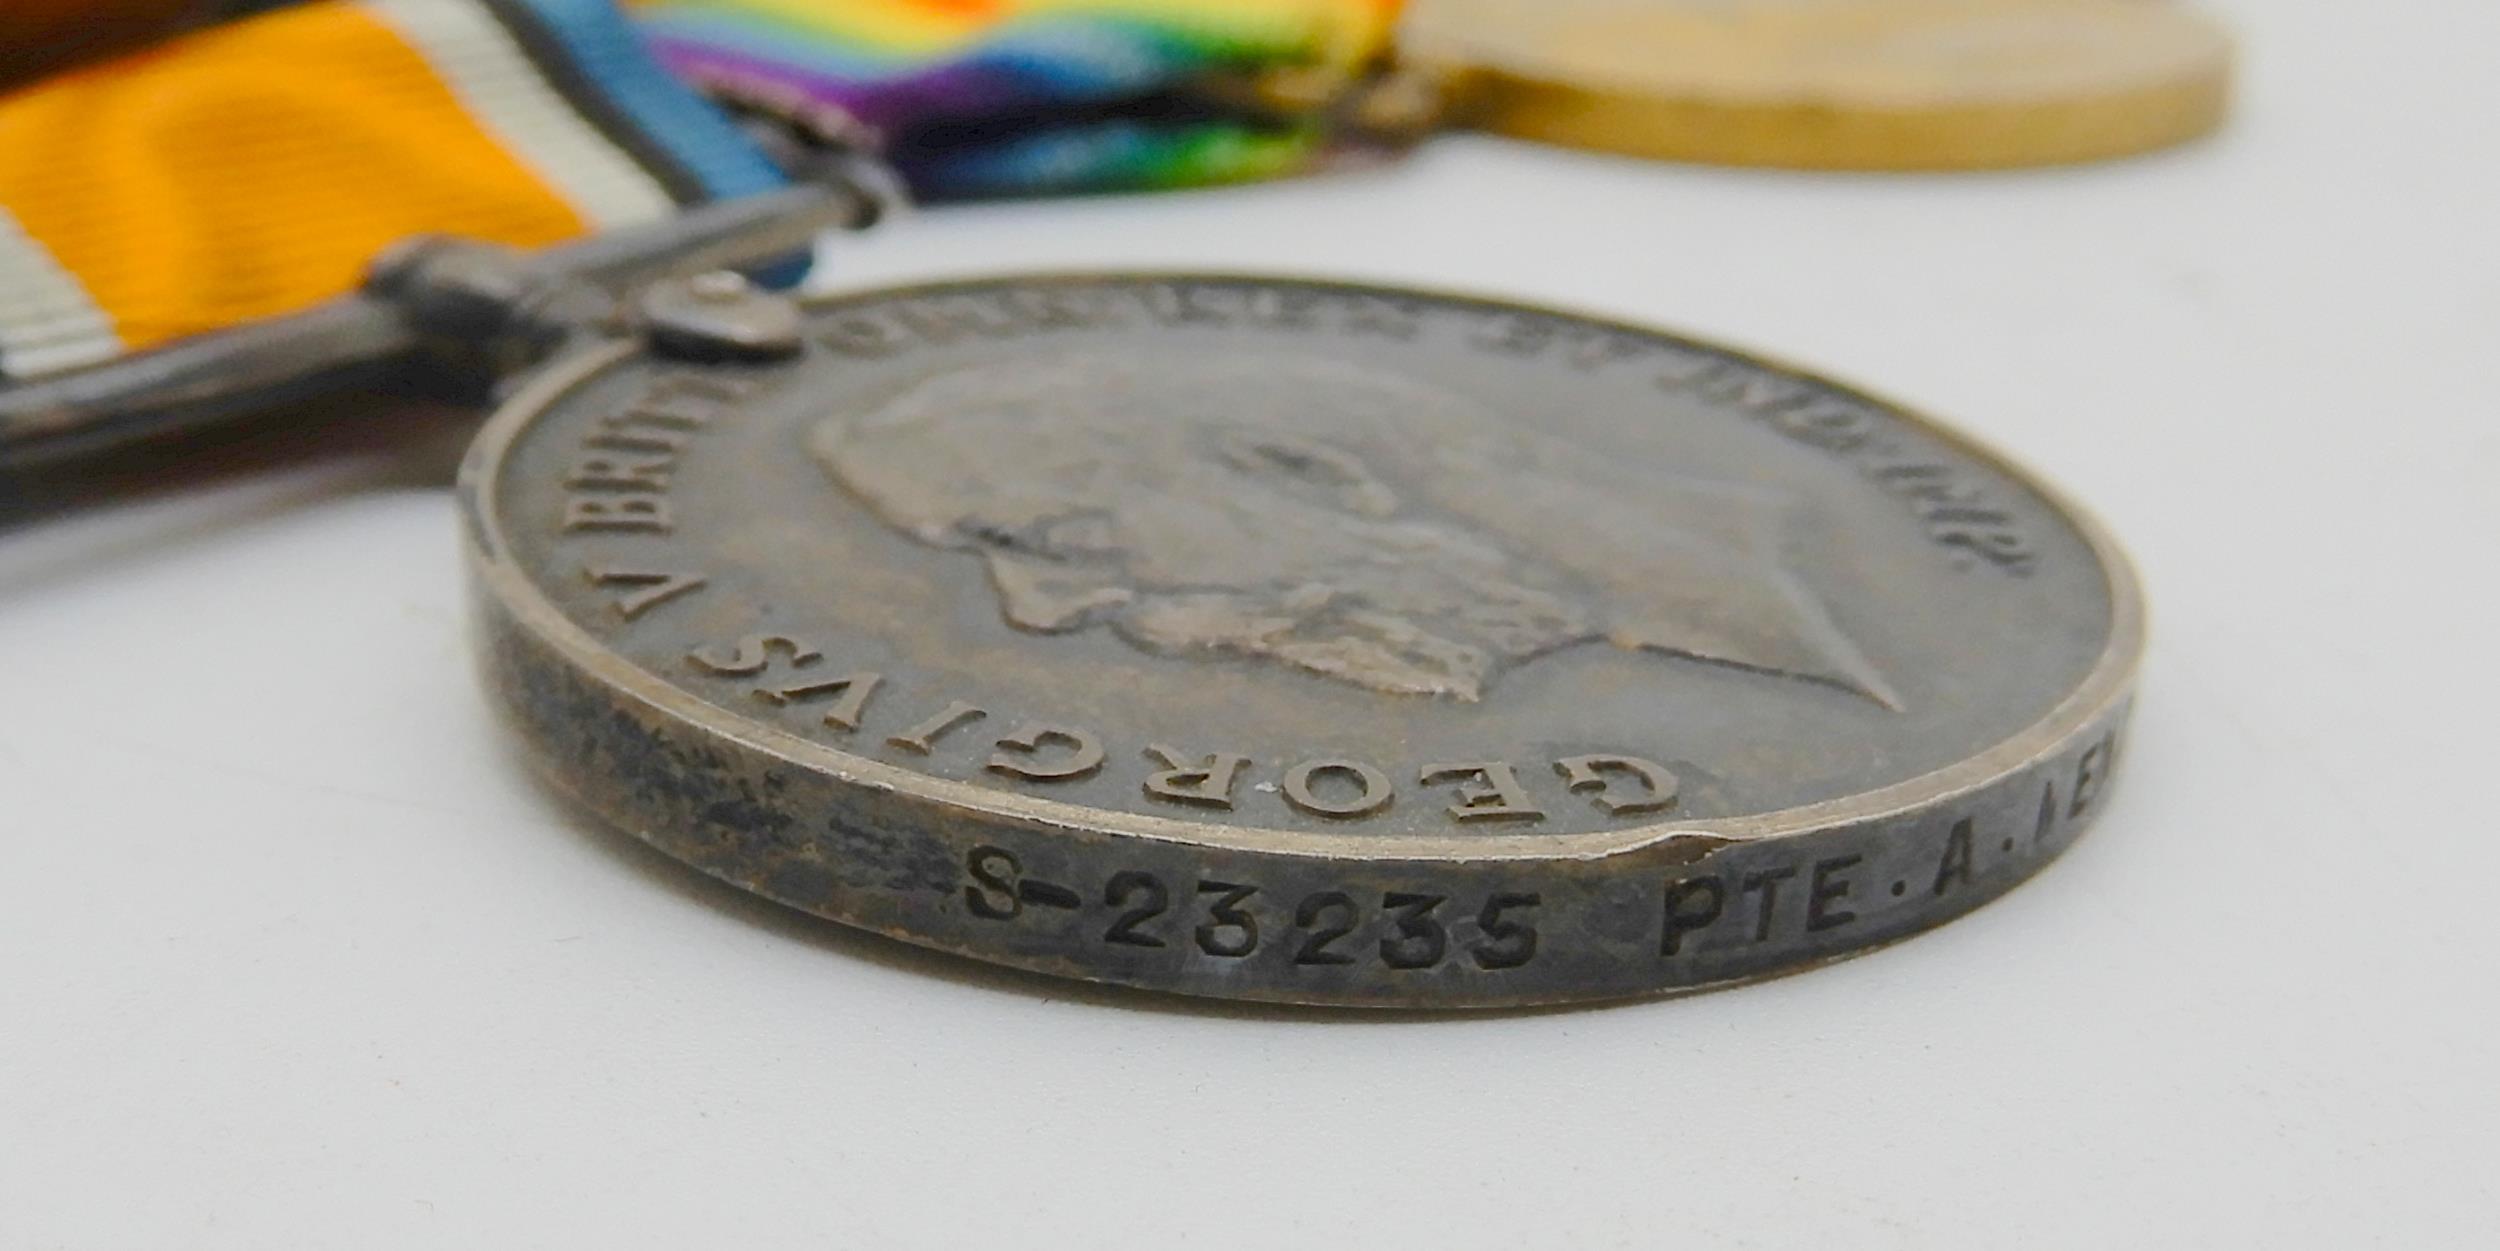 A set of three WW1 medals awarded to PTE Alexander Menzies S-23235 A. & S. H. together with a set of - Image 3 of 14